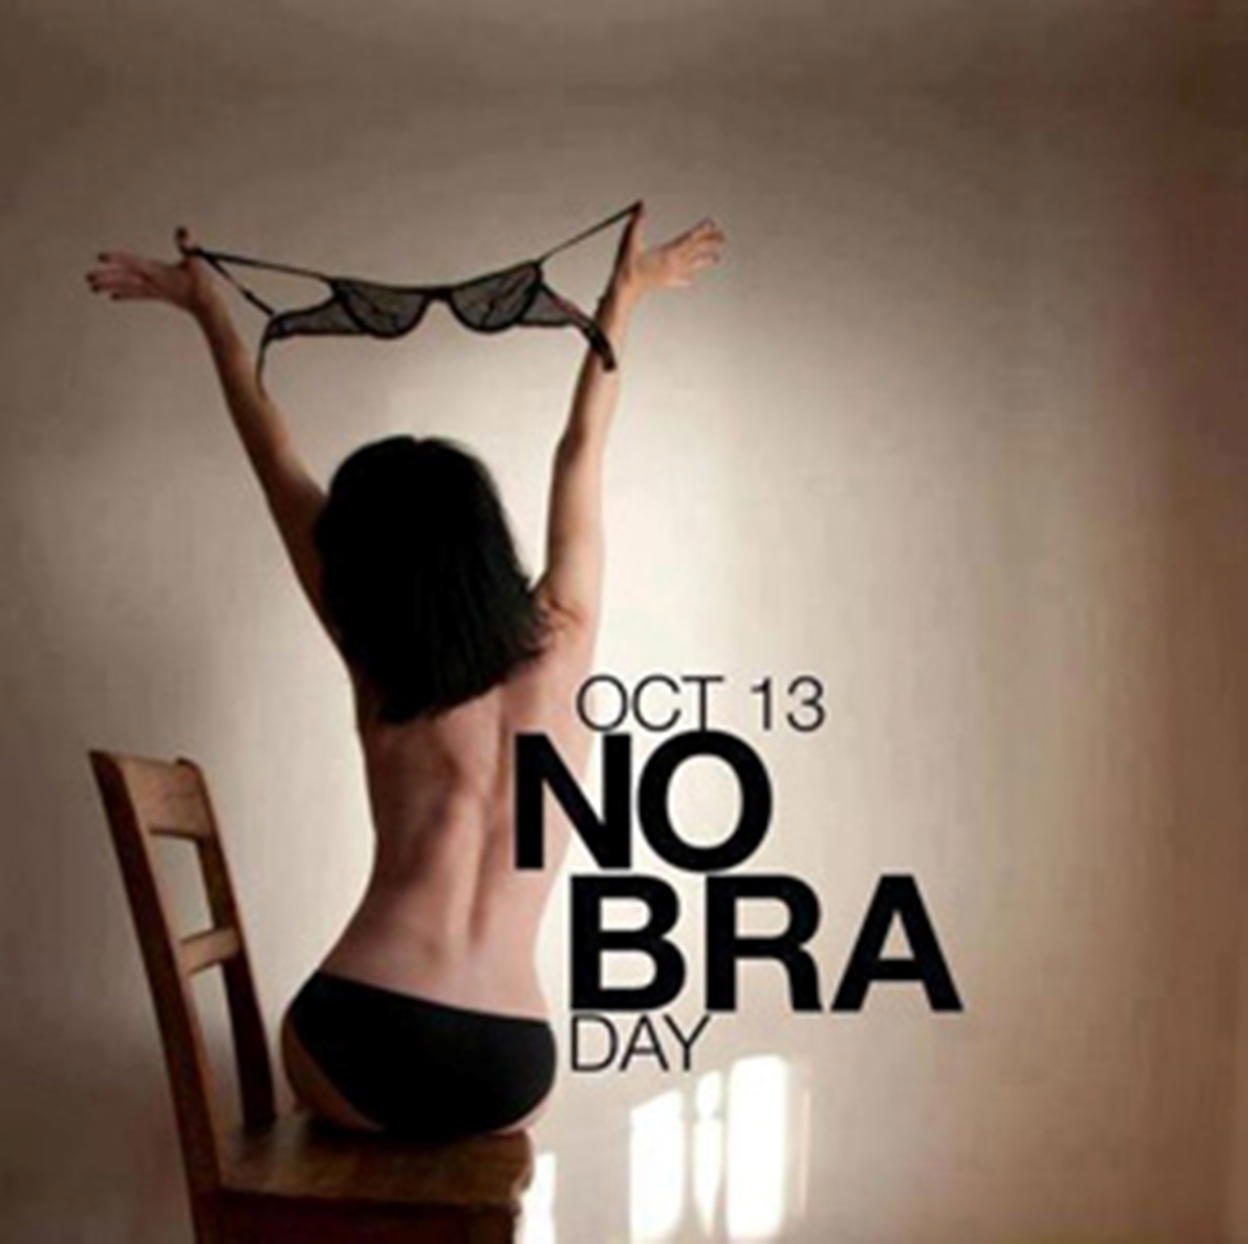 What Is No Bra Day (13th Oct) And Why Is It Trending On Social Media? -  Romance - Nigeria